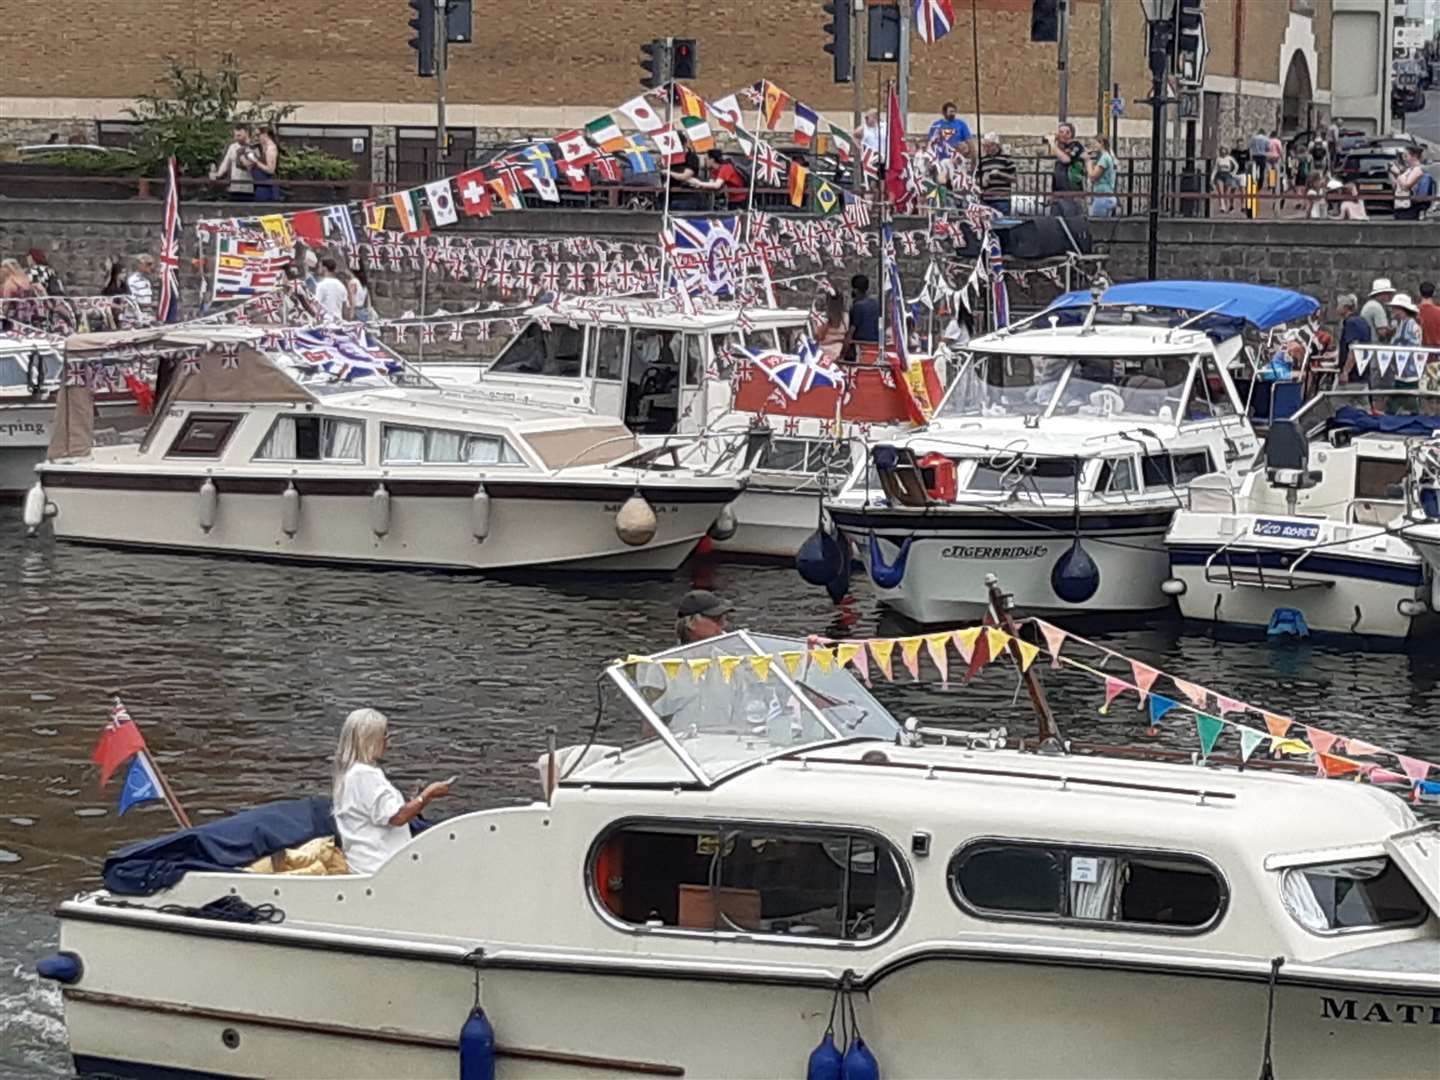 Boats moored up on the River Medway for the festival